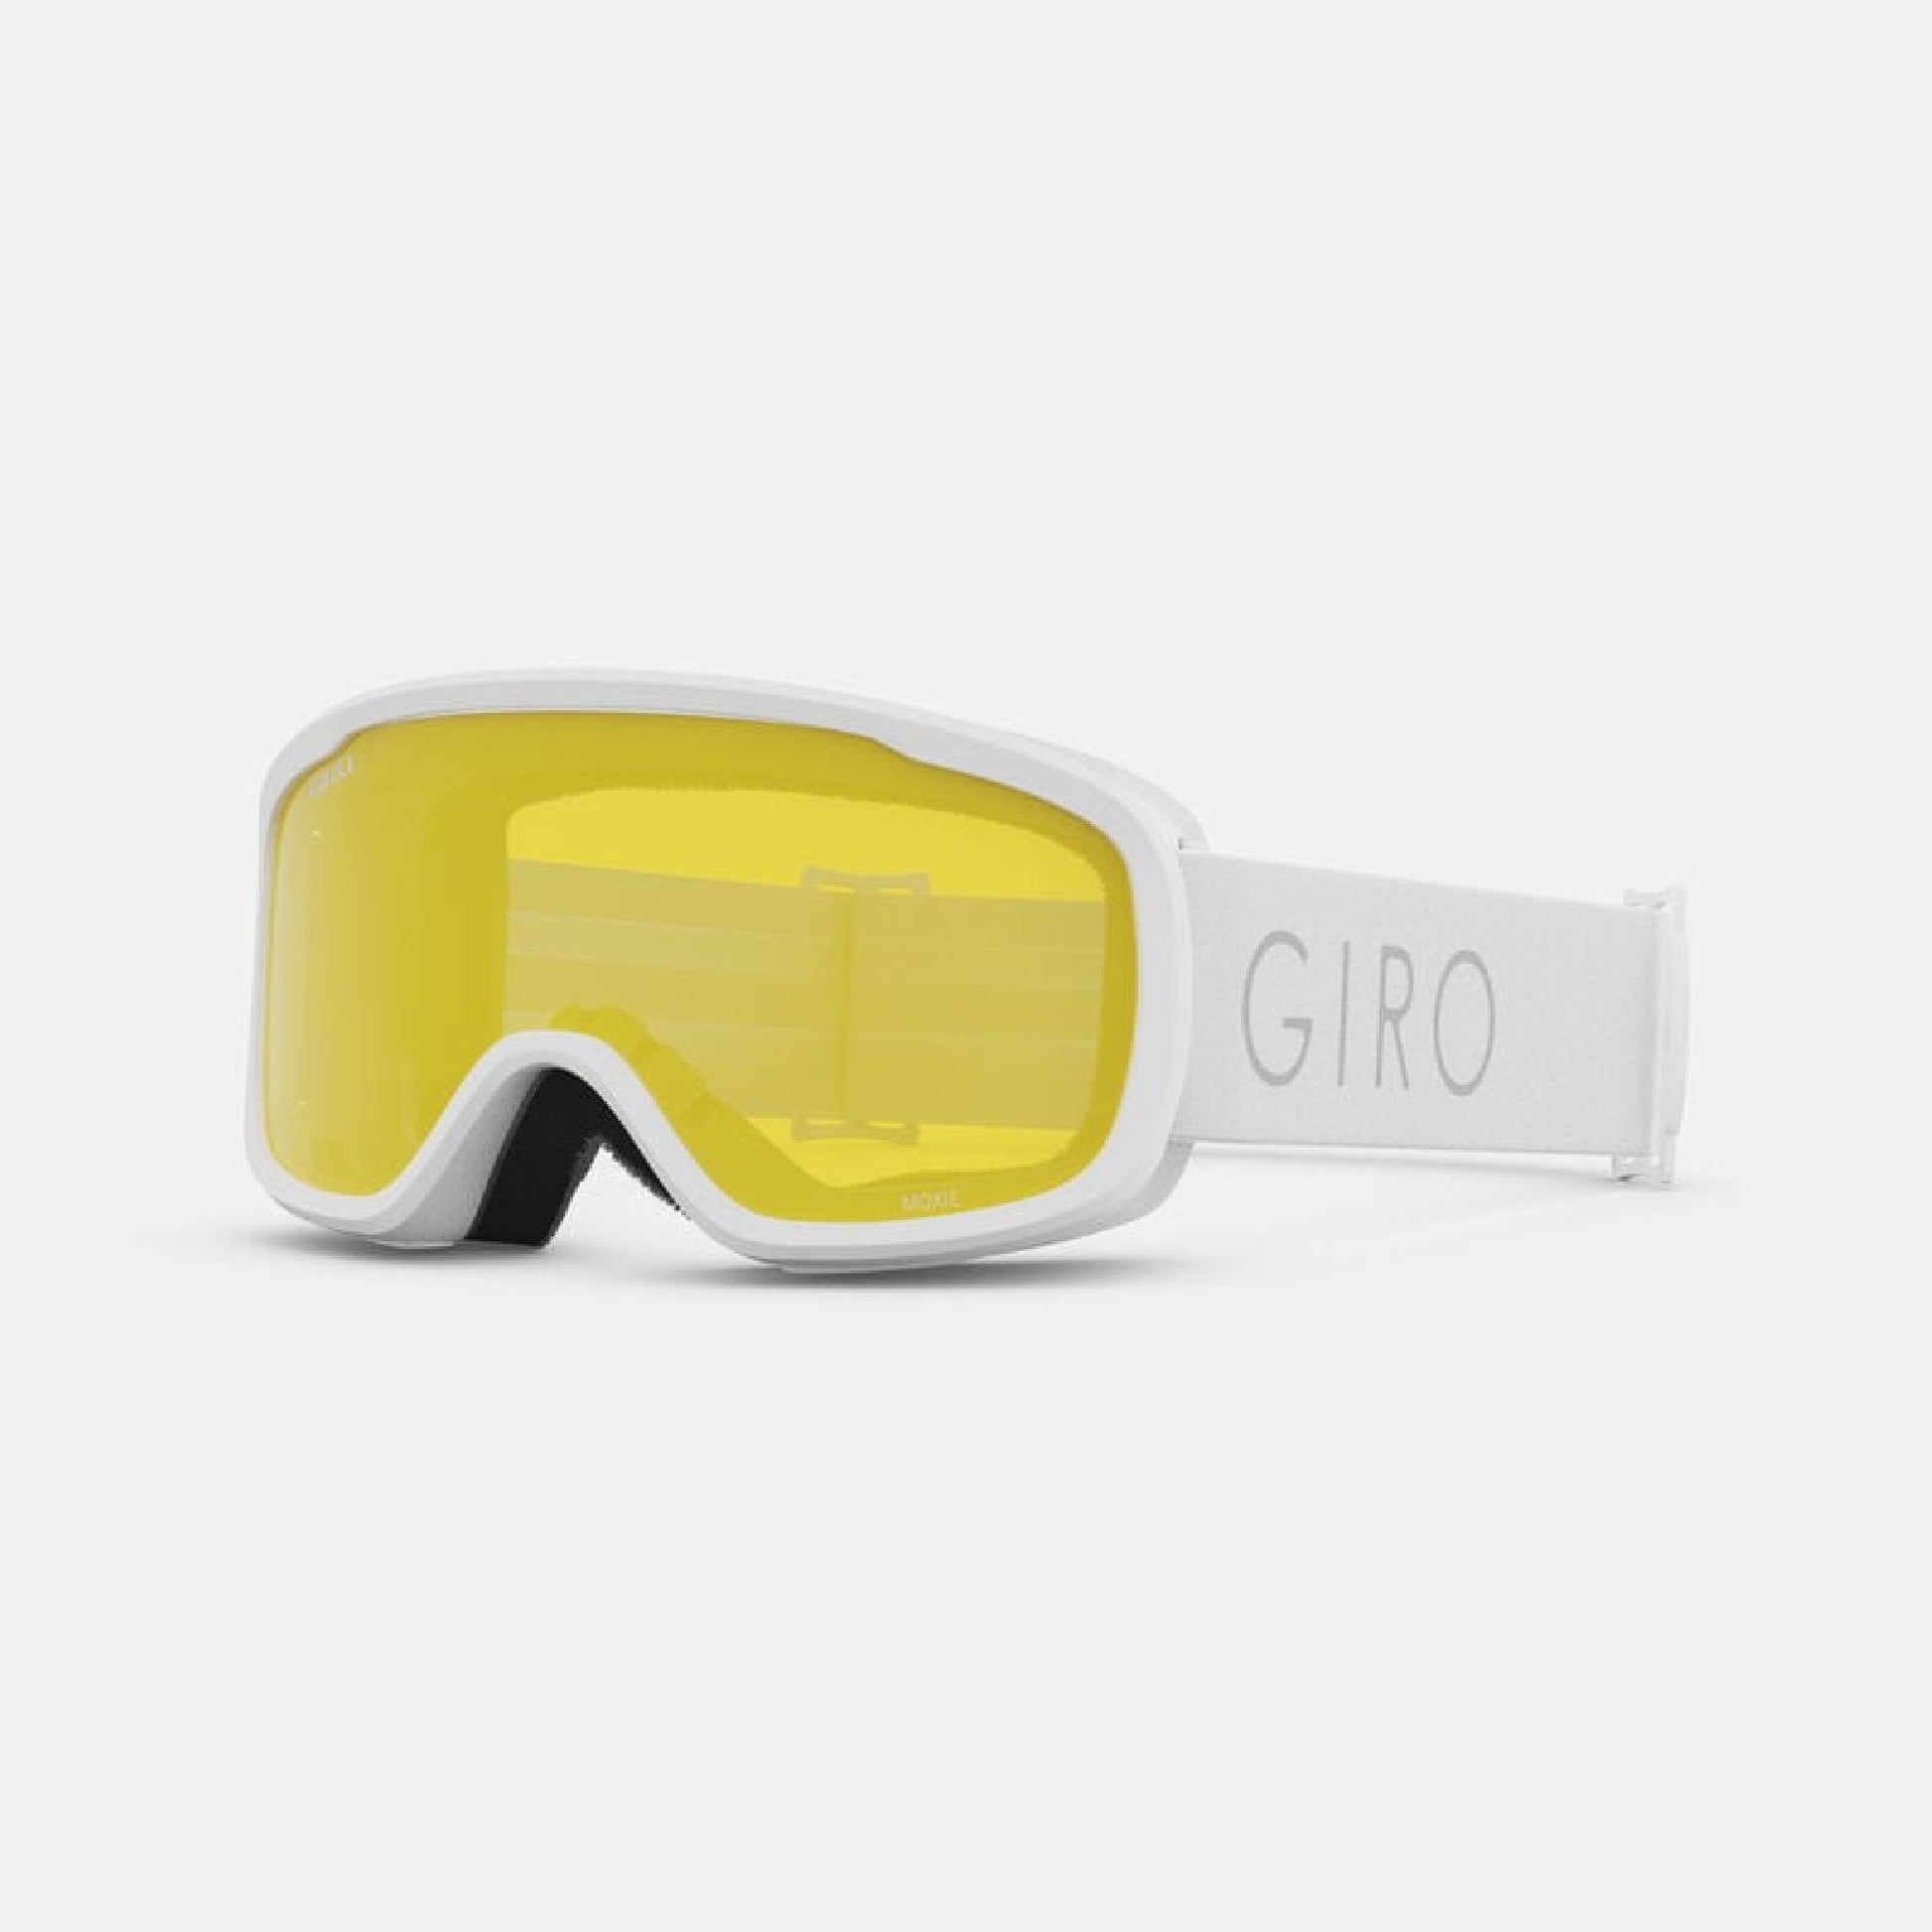 Giro Women's Moxie AF Snow Goggles White Core LIght Amber Pink Snow Goggles